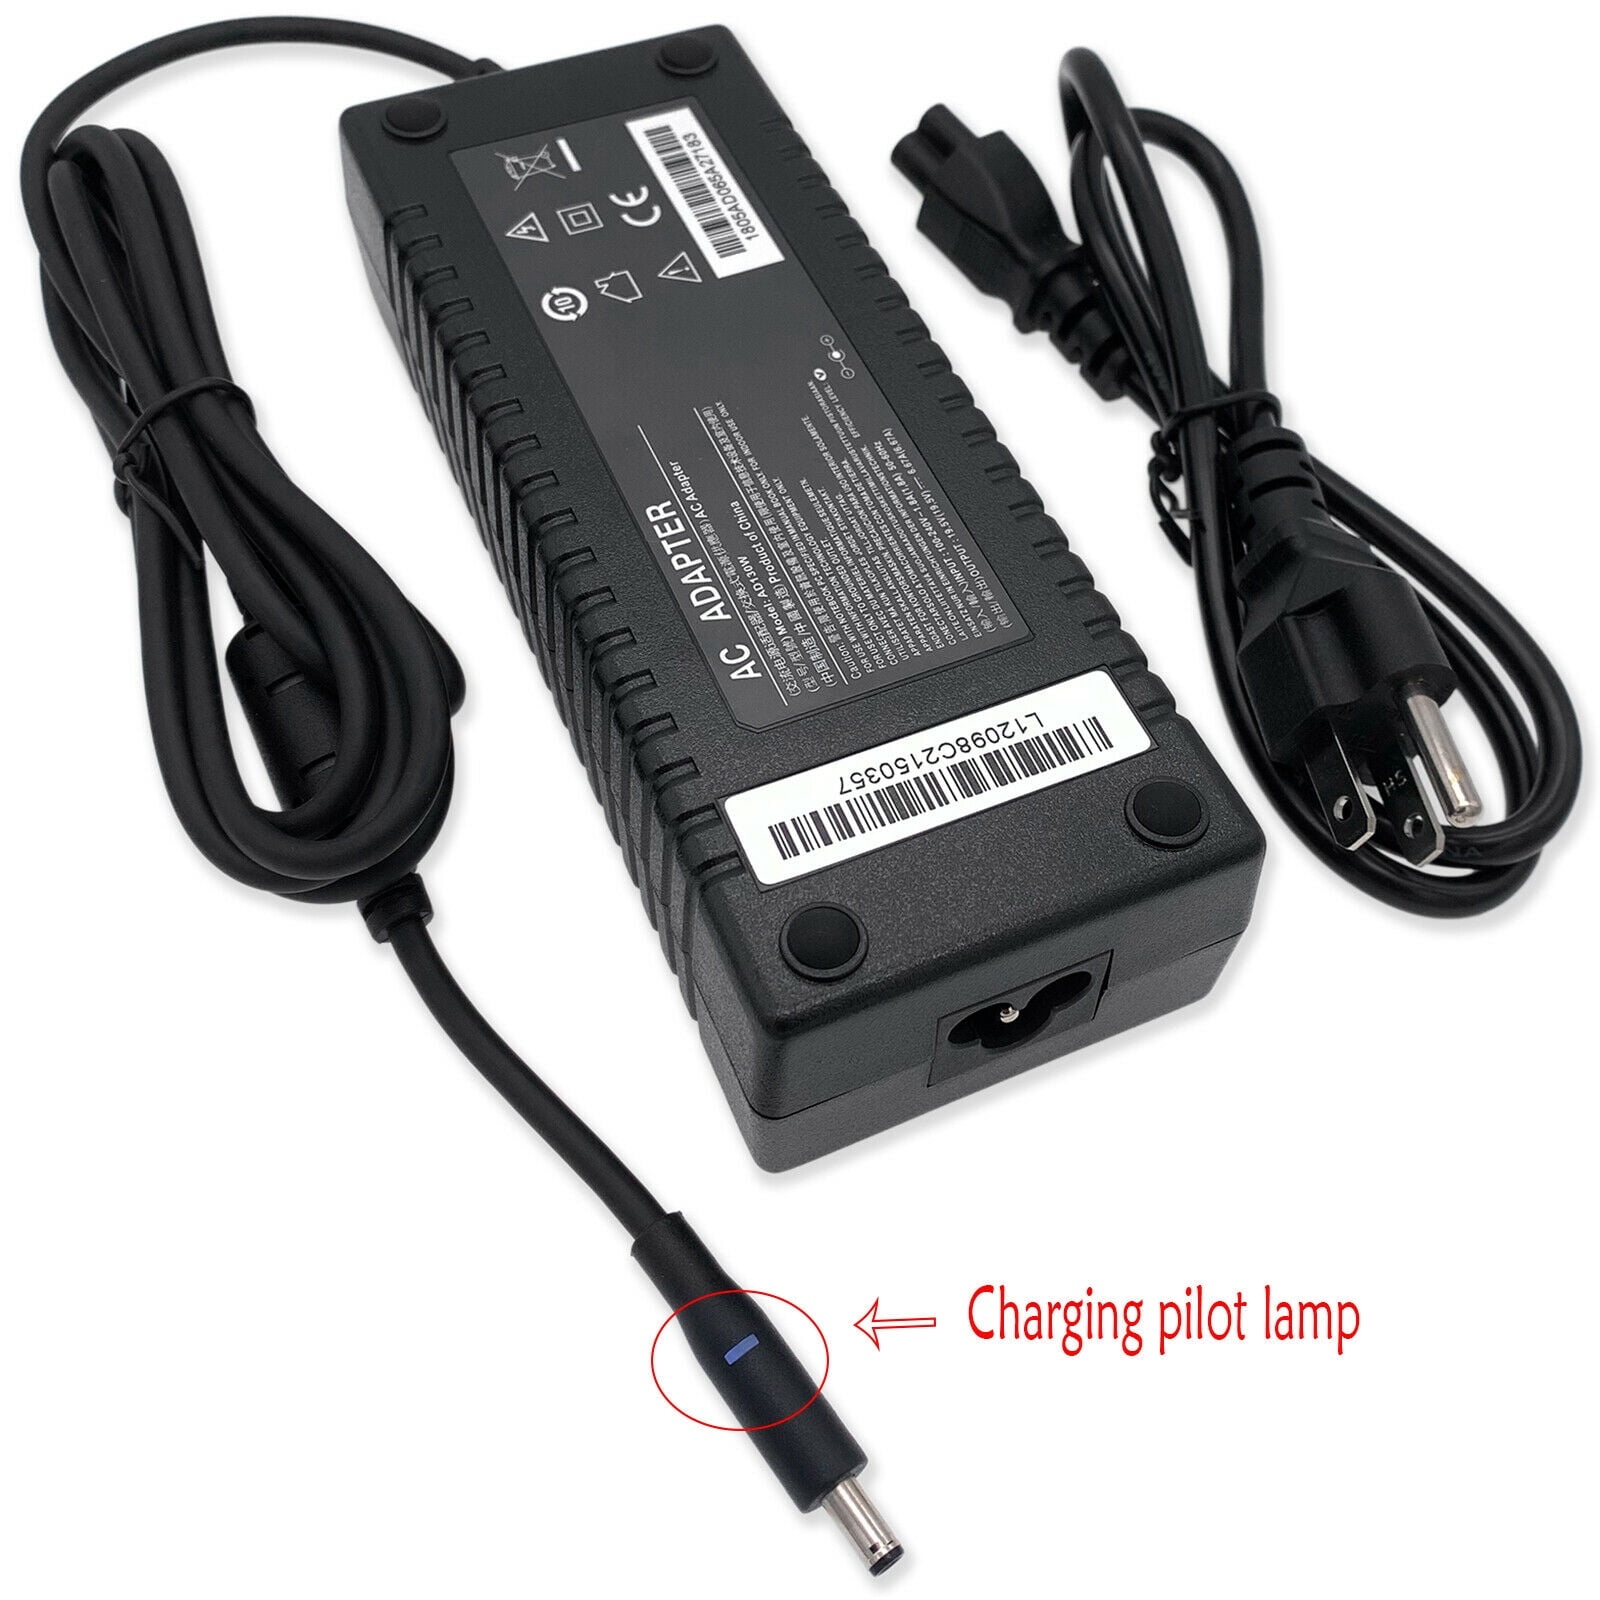 180W AC Power Adapter Charger for Dell INSPIRON 15 7000 7559 7566 7577 Gaming PC